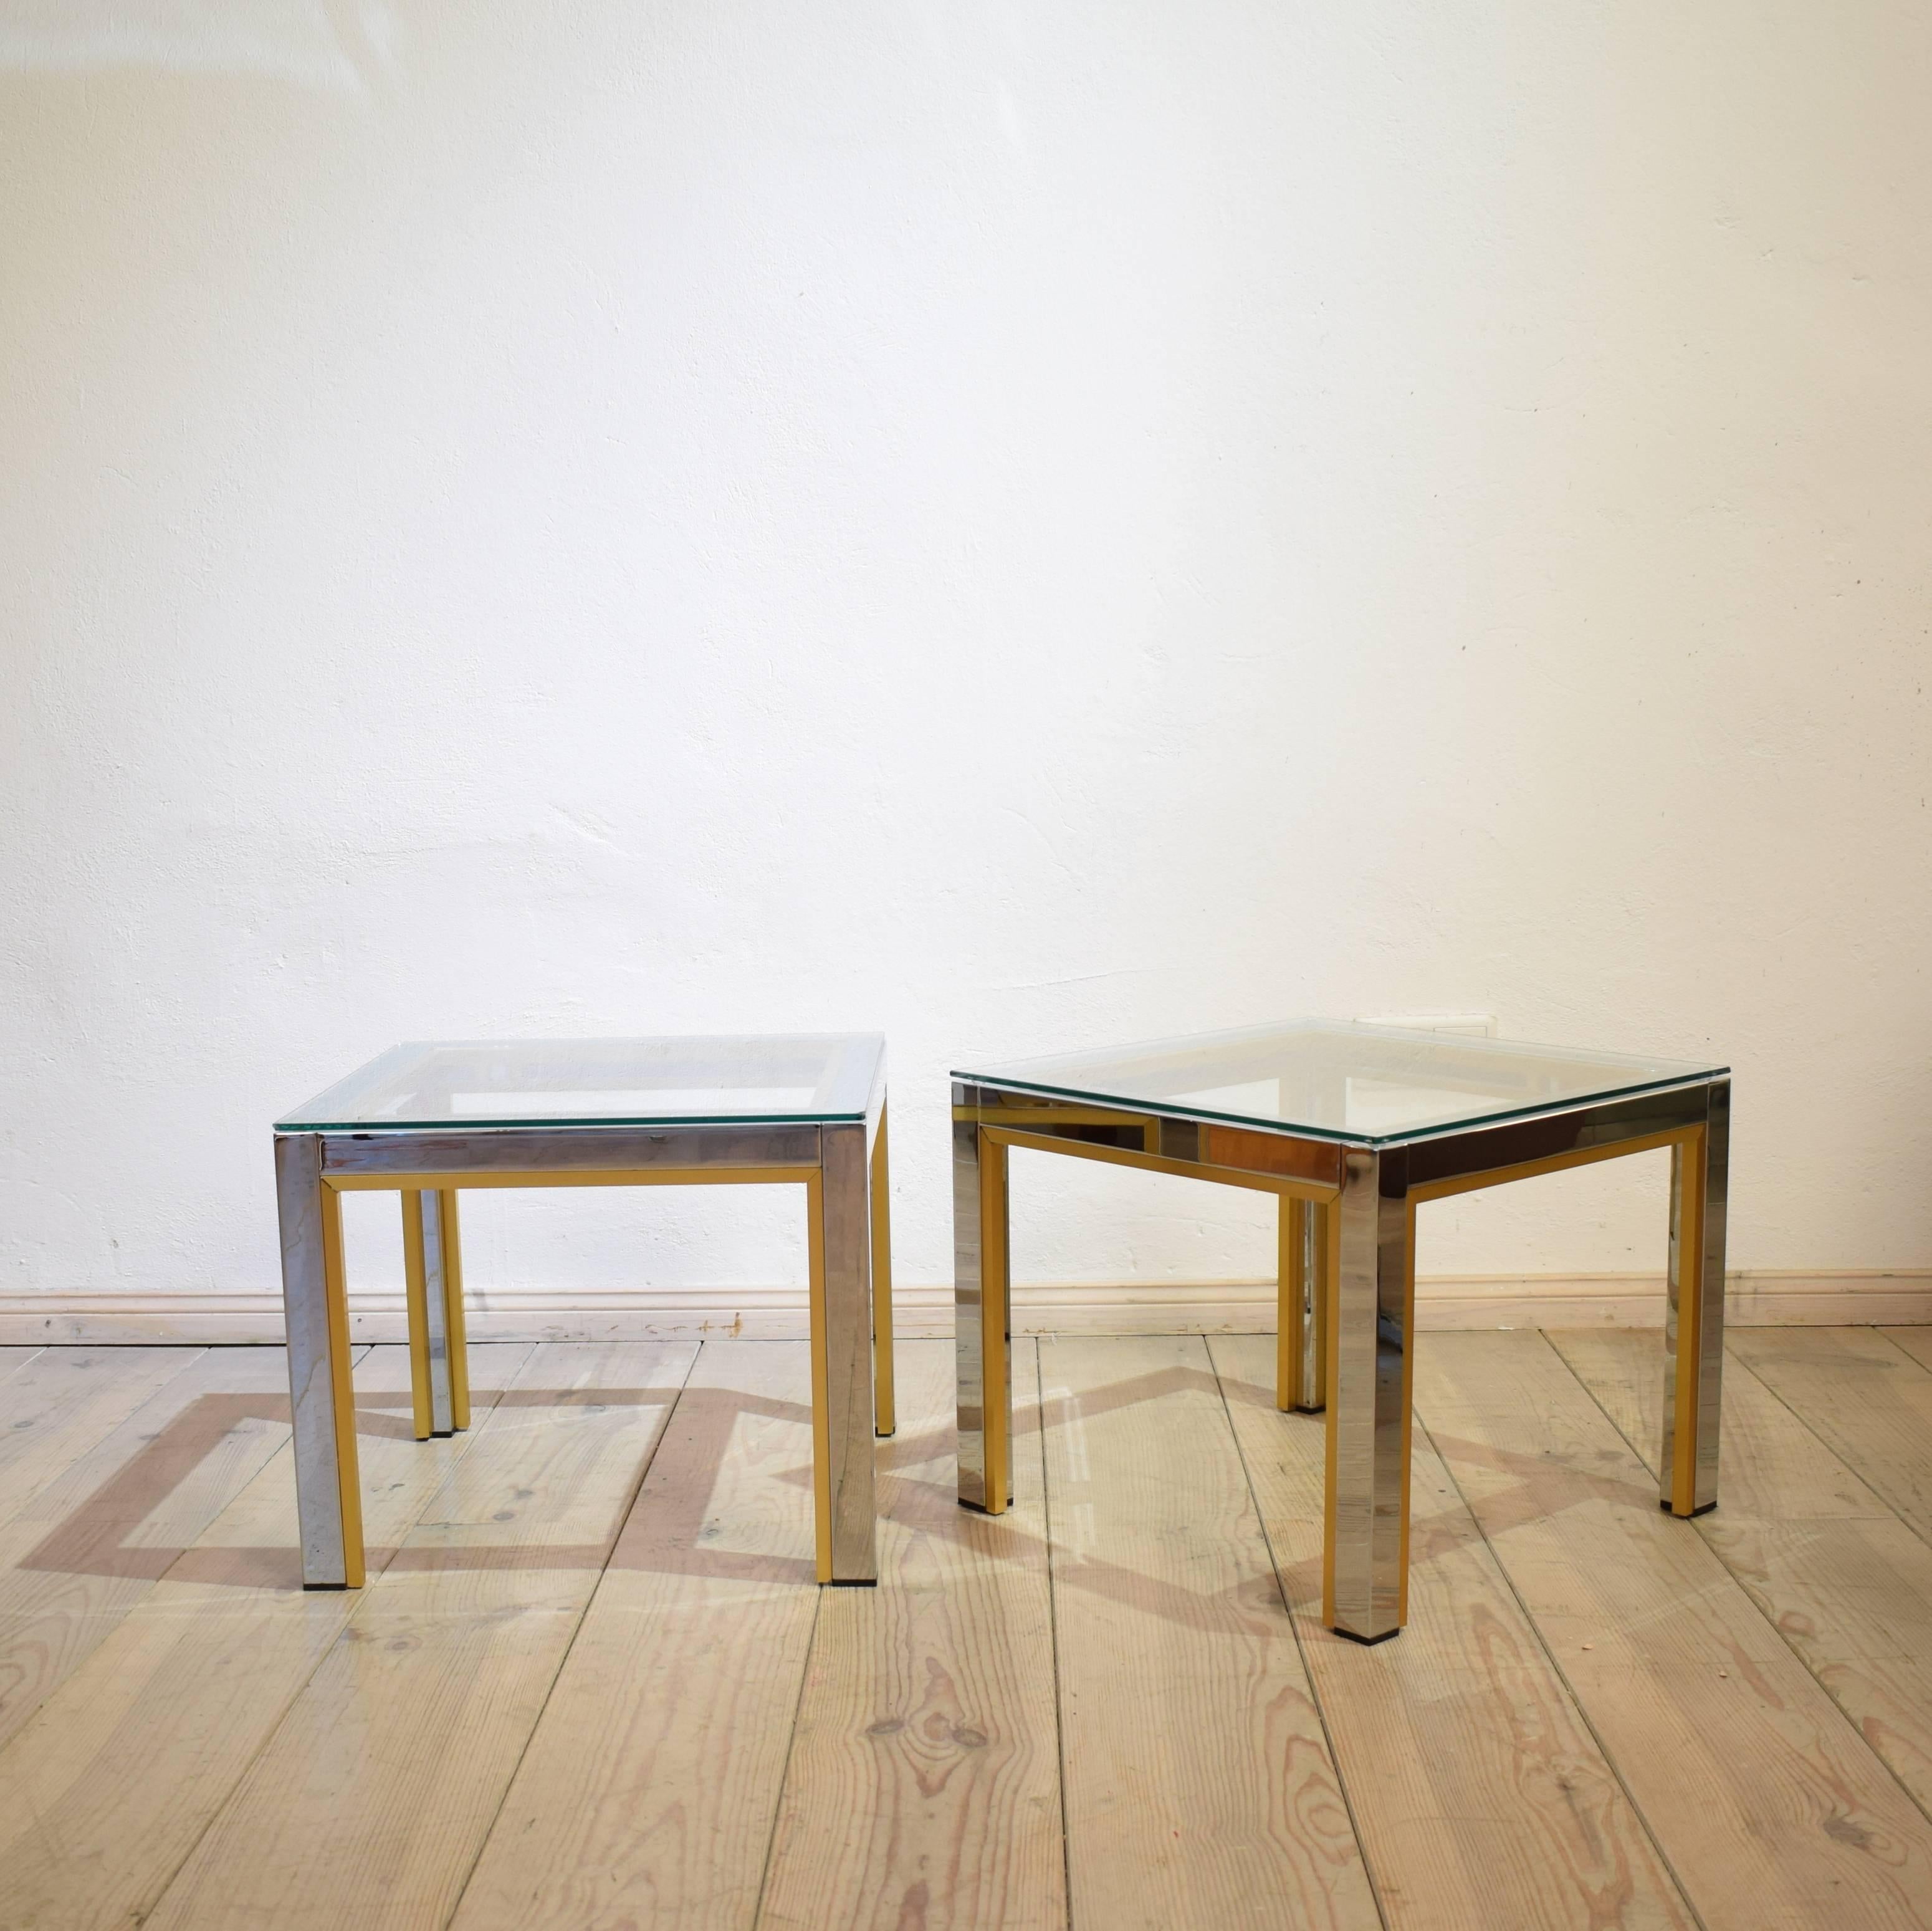 1970s Brass and Chrome Pair of Side Coffee Table by Renato Zevi for Romeo Rega (Moderne der Mitte des Jahrhunderts)